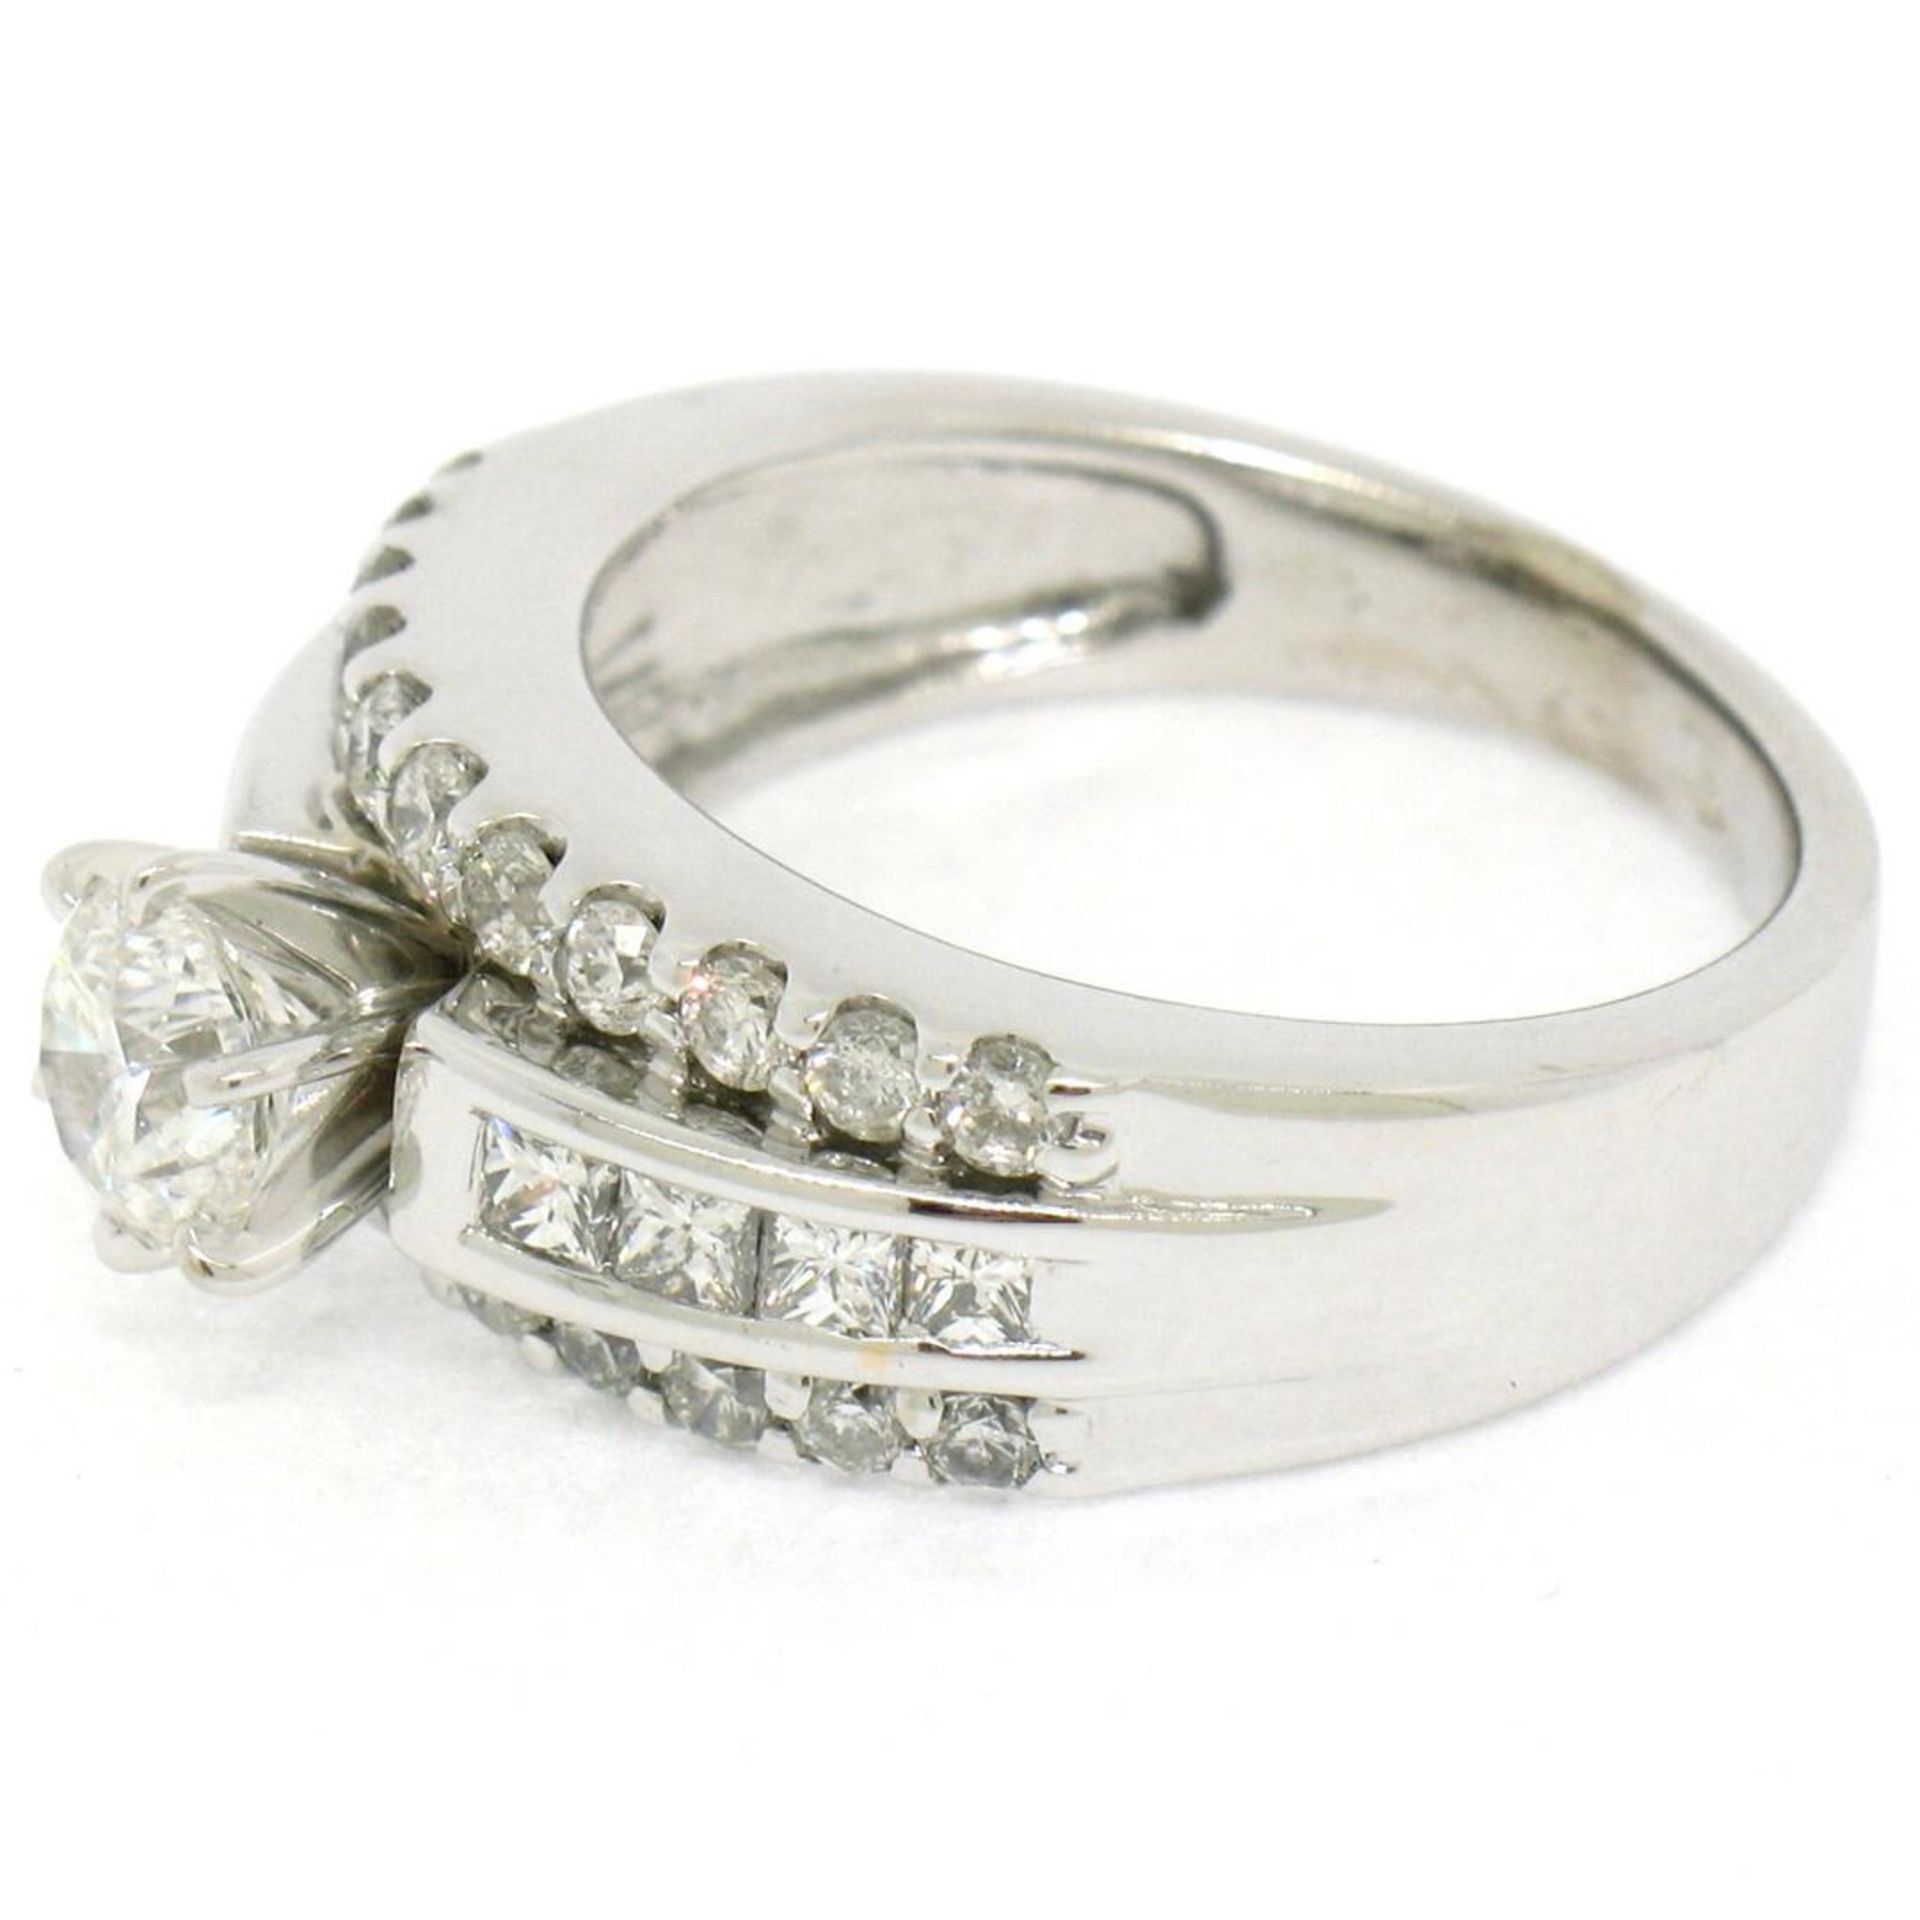 14K White Gold 1.39ctw Prong Round & Channel Princess Diamond Engagement Ring - Image 6 of 9